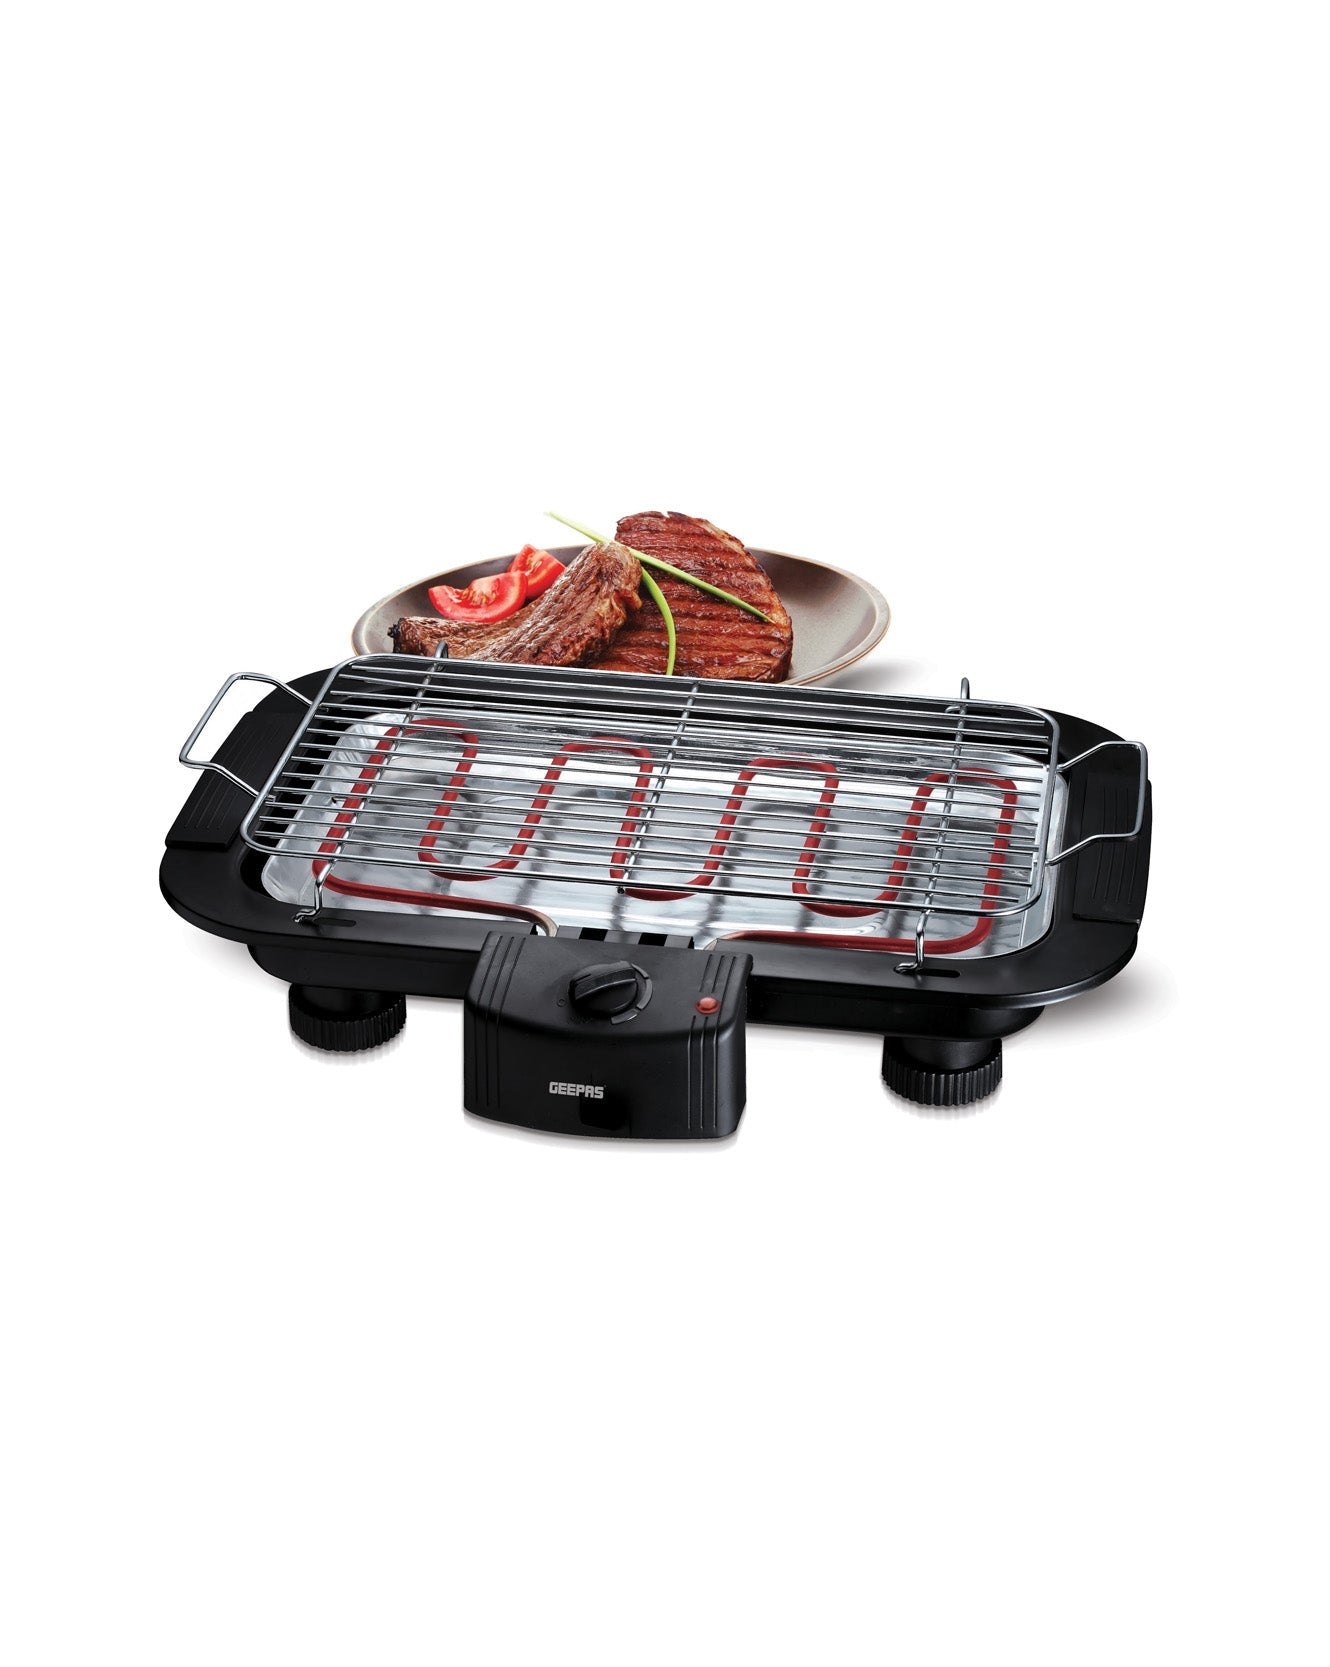 GEEPAS Electric Barbecue Grill (GBG877N)